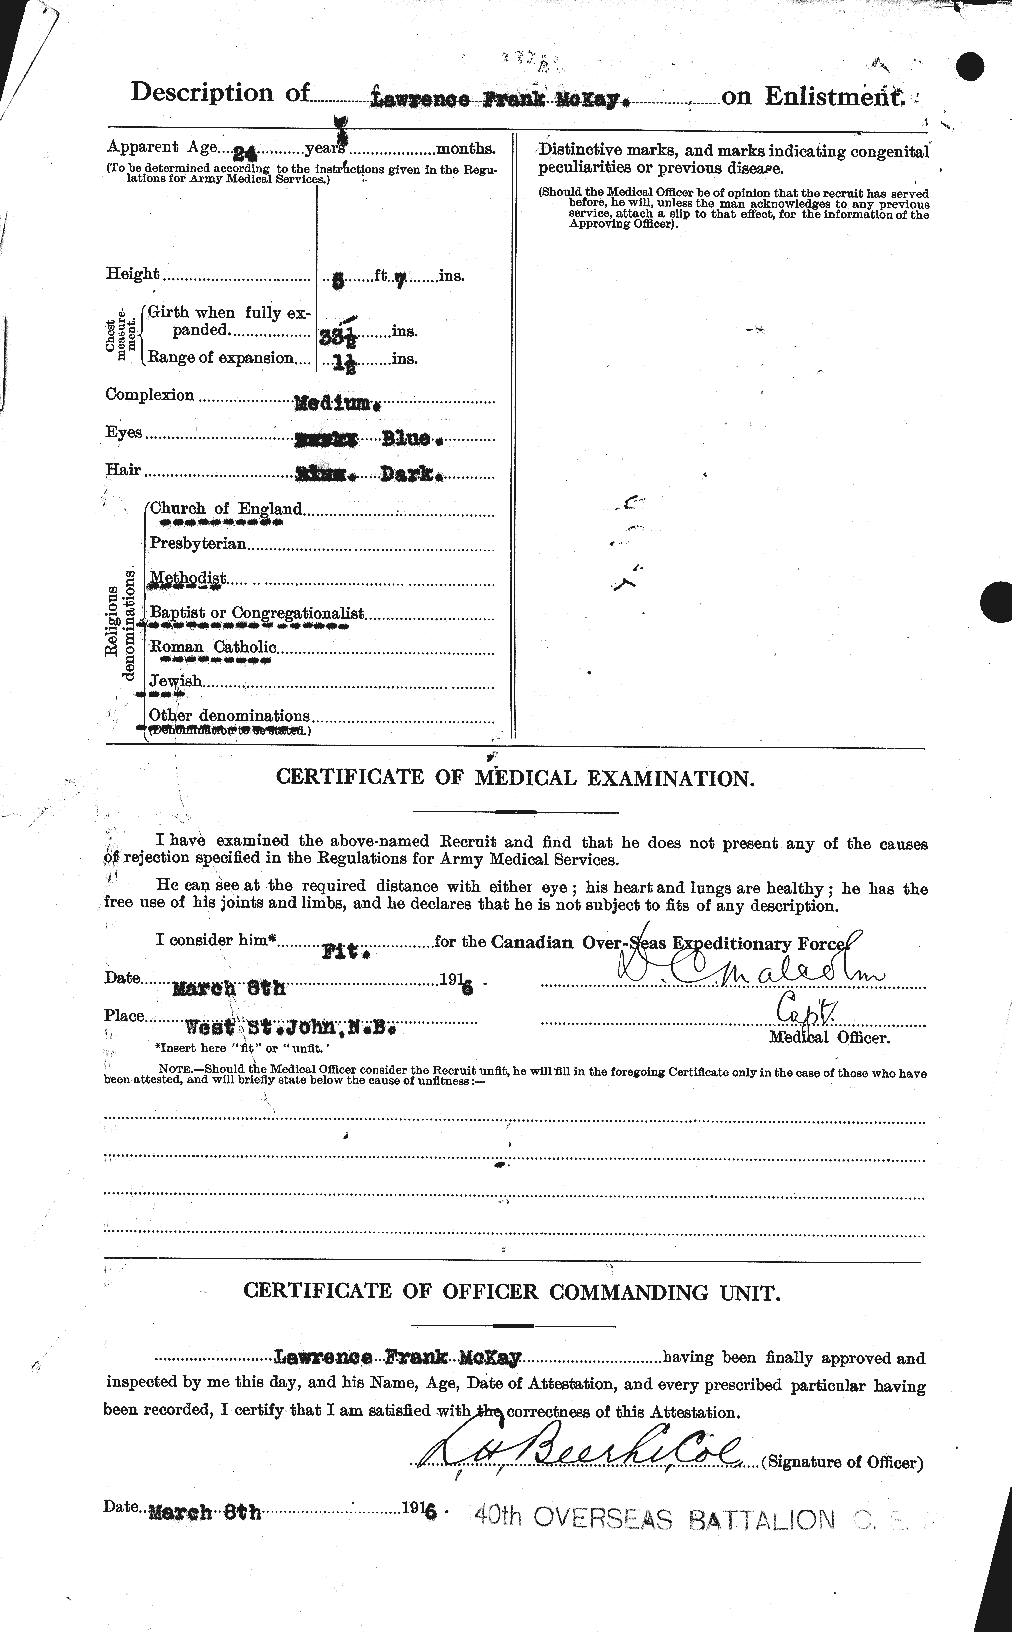 Personnel Records of the First World War - CEF 527141b